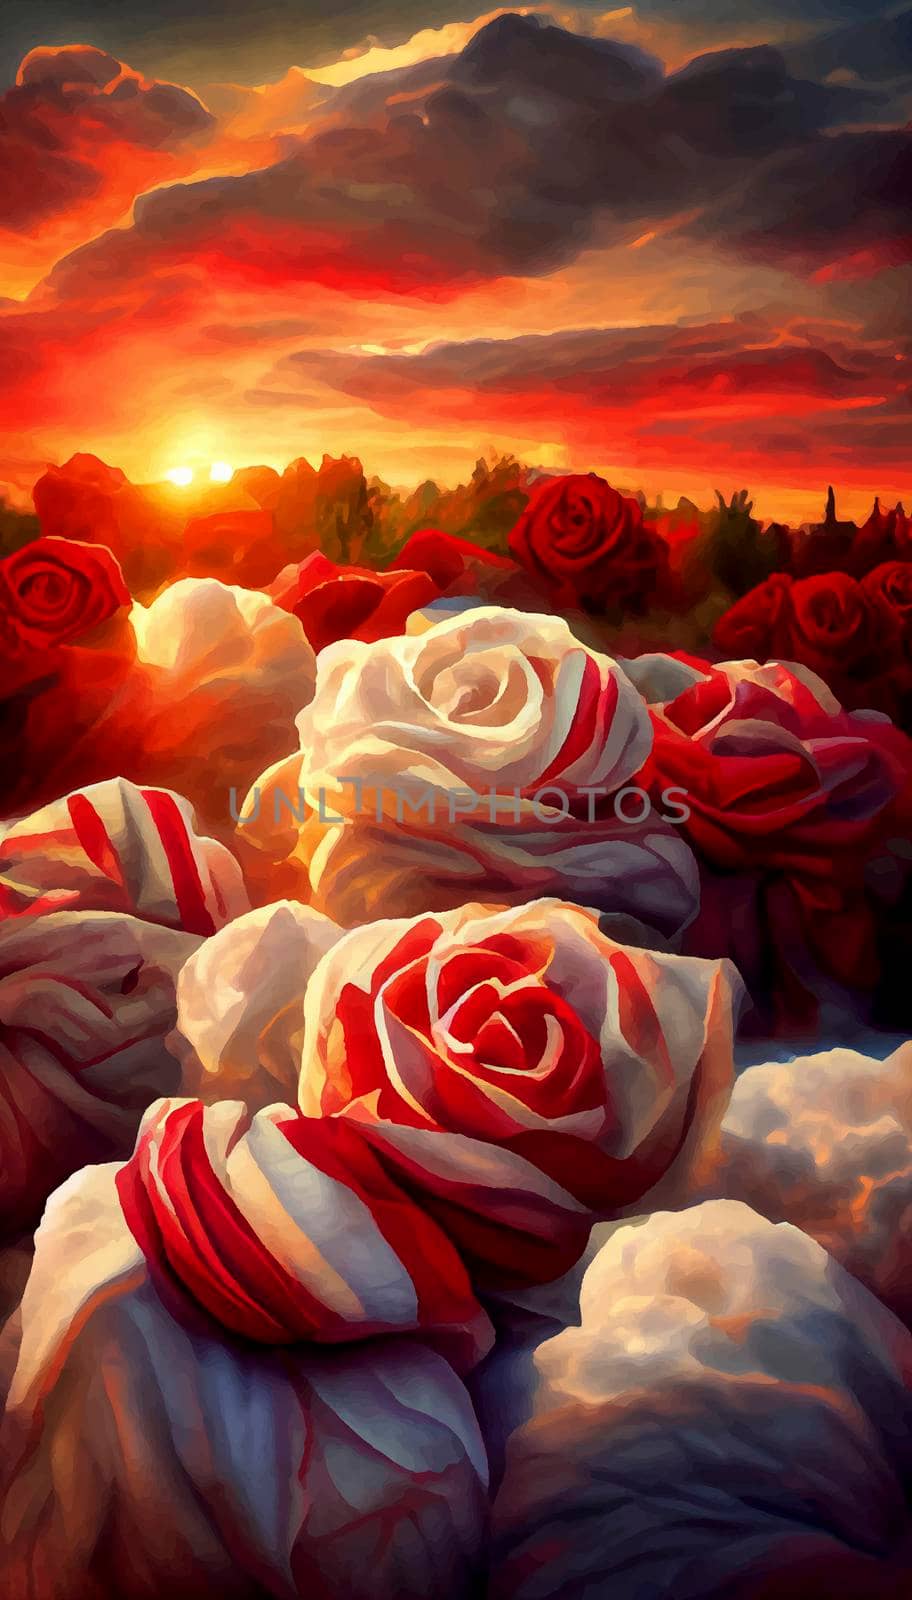 red and white roses under the colorful sky. roses with castle and sunset in the background.